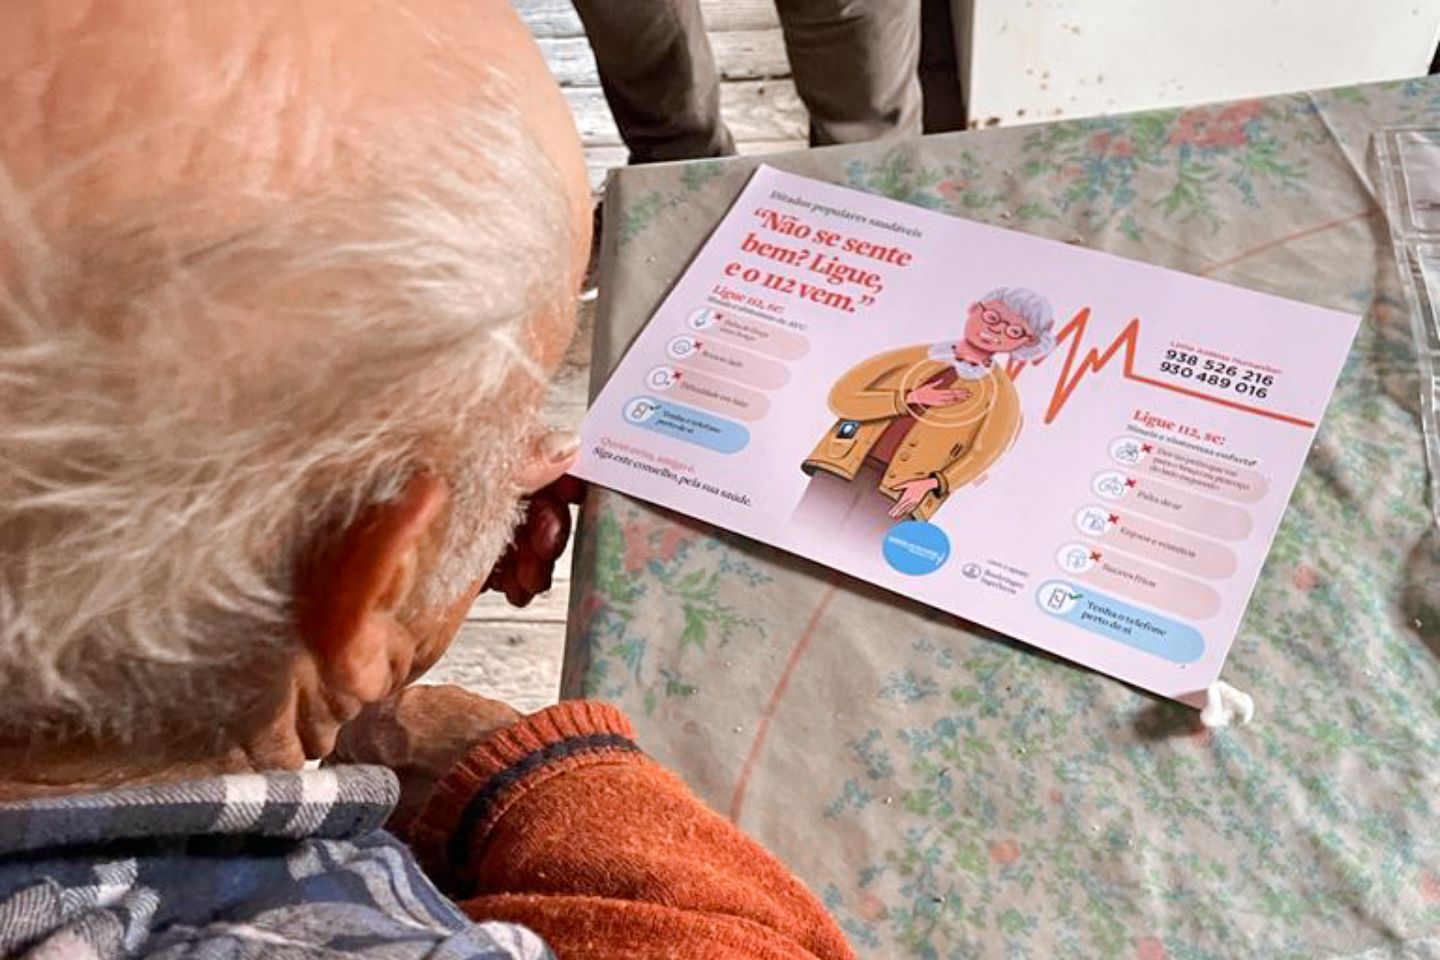 Elderly person looking at a flyer